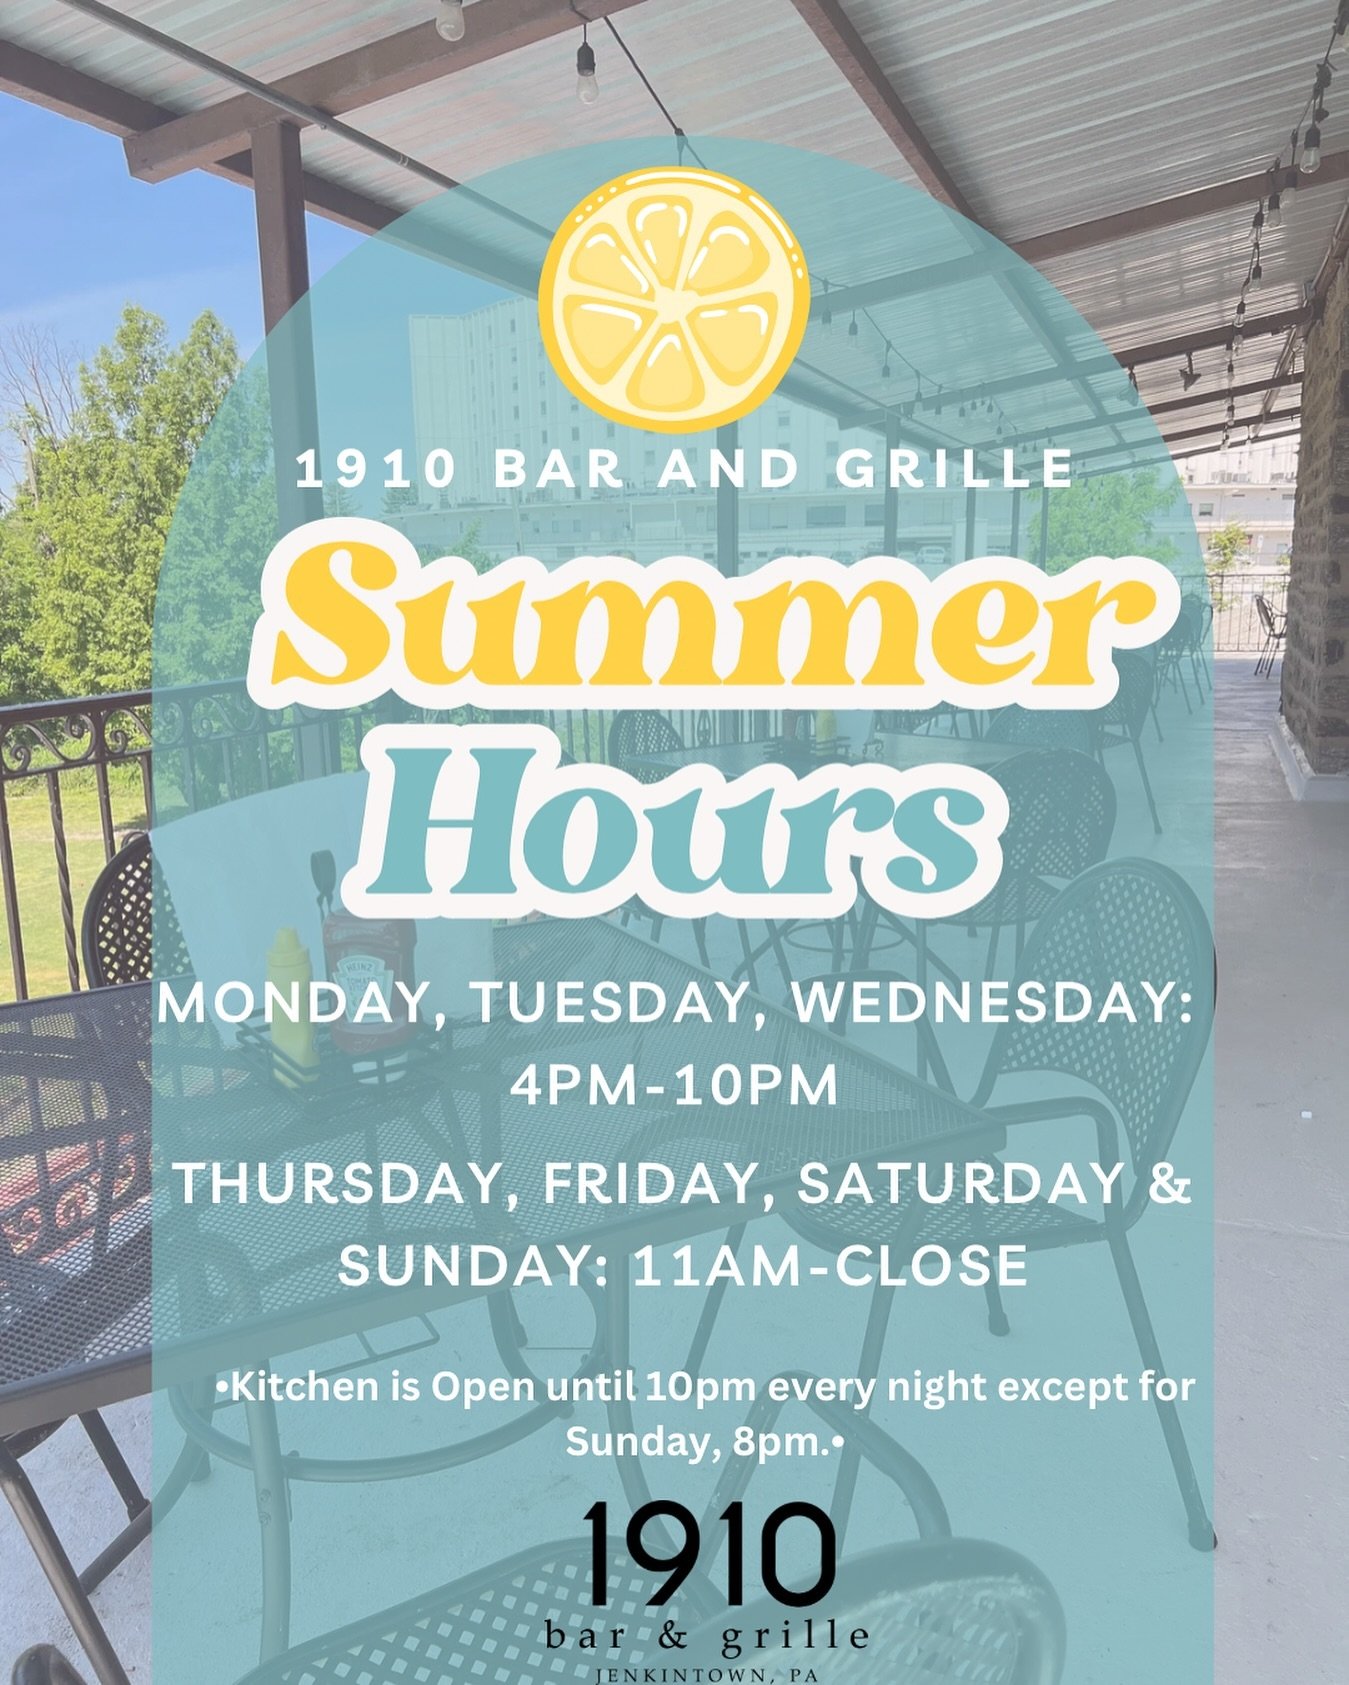 Don&rsquo;t forget! We are now open 7 days a week starting TODAY! 😎☀️

Stay tuned for our Monday &amp; Tuesday Happy Hour specials!